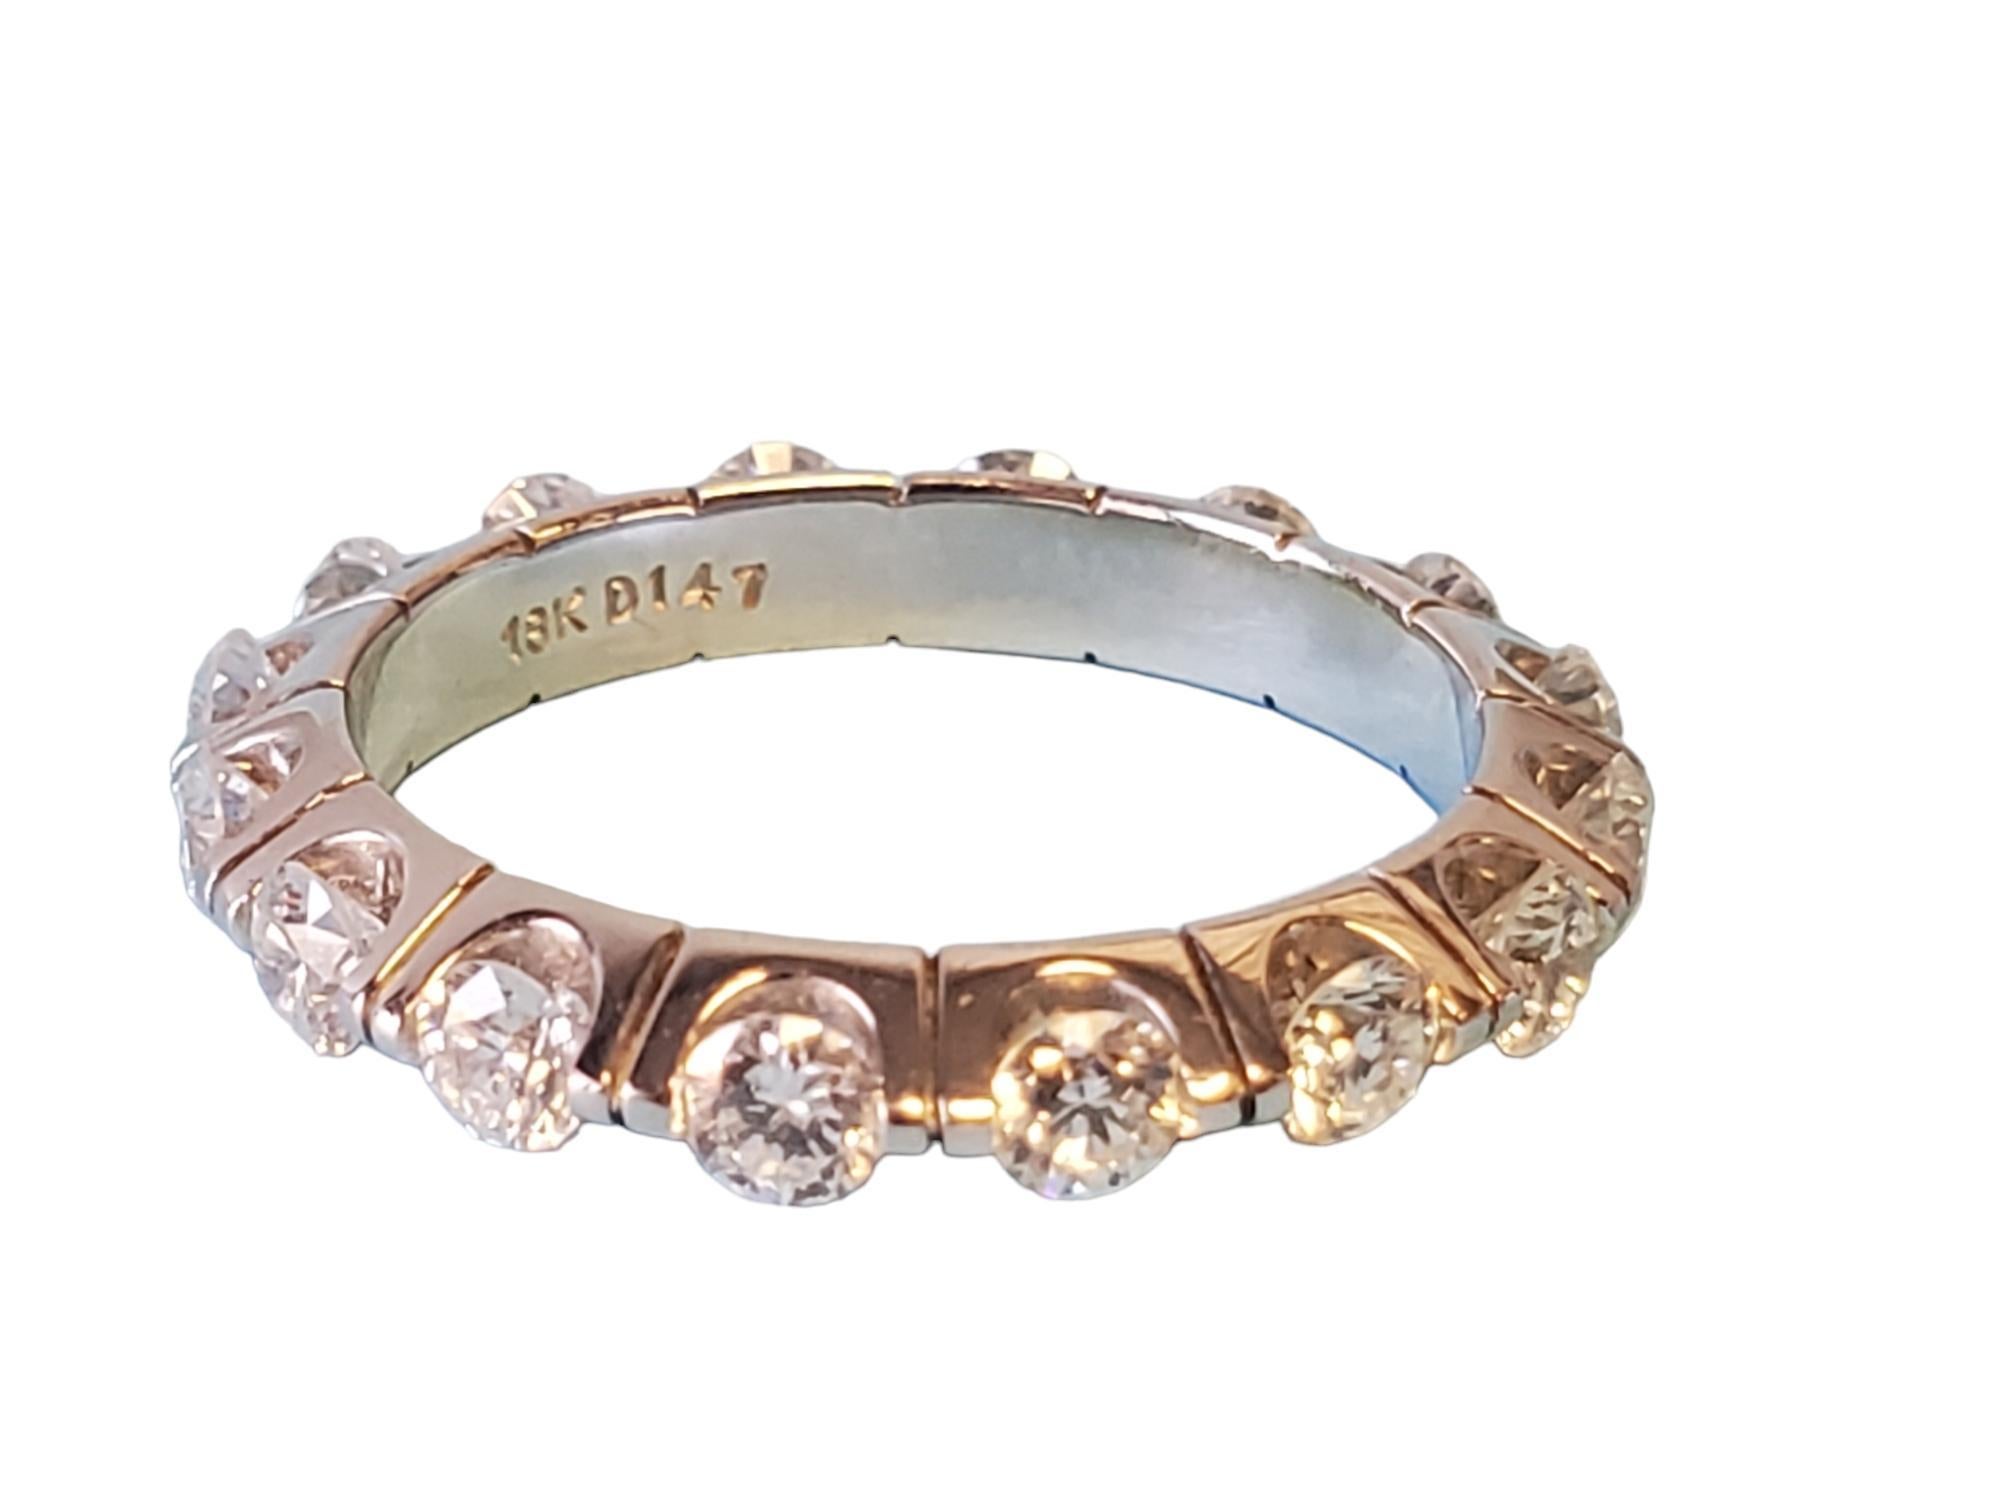 18k White gold knife edge eternity band, this is a rare find...I never see this style as an eternity band it is cool. This is a new - closeout piece. Unworn, beautiful diamond eternity band. This band features 1.50tcw white vs diamonds that exhibit